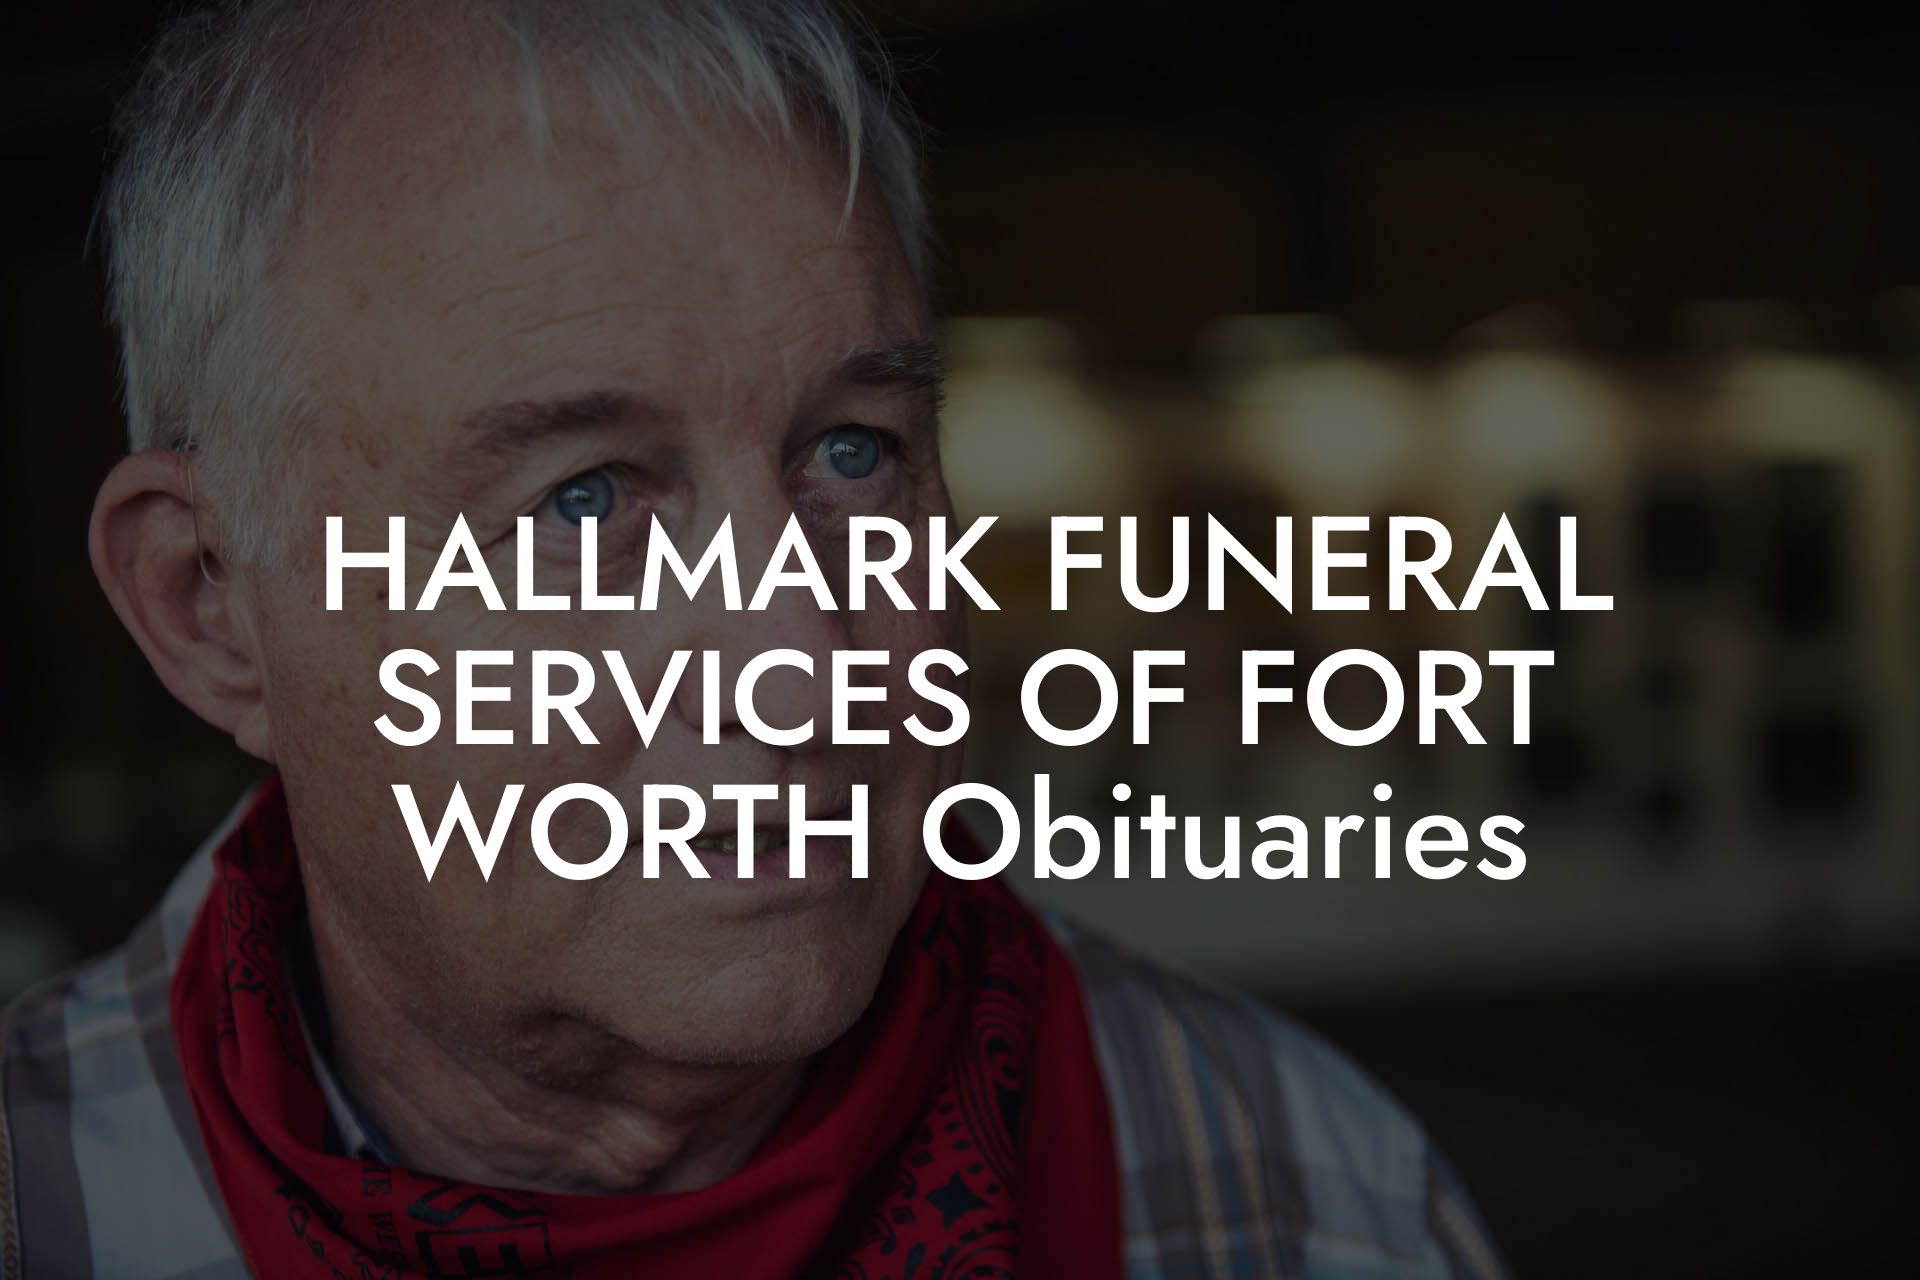 HALLMARK FUNERAL SERVICES OF FORT WORTH Obituaries